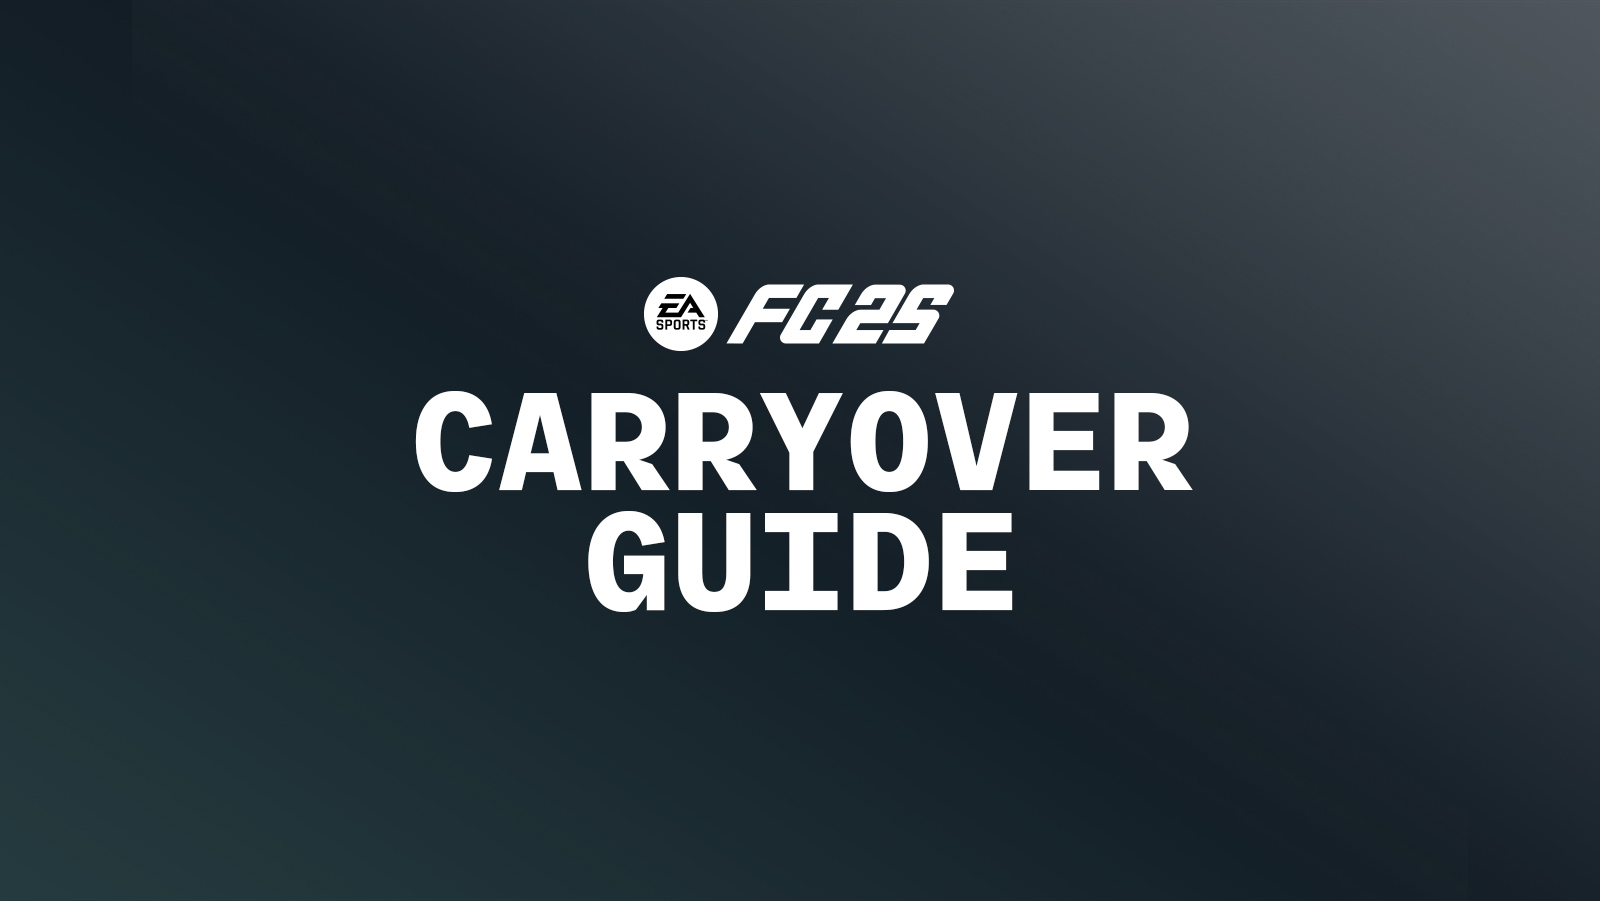 FC 25 Carryover Guide